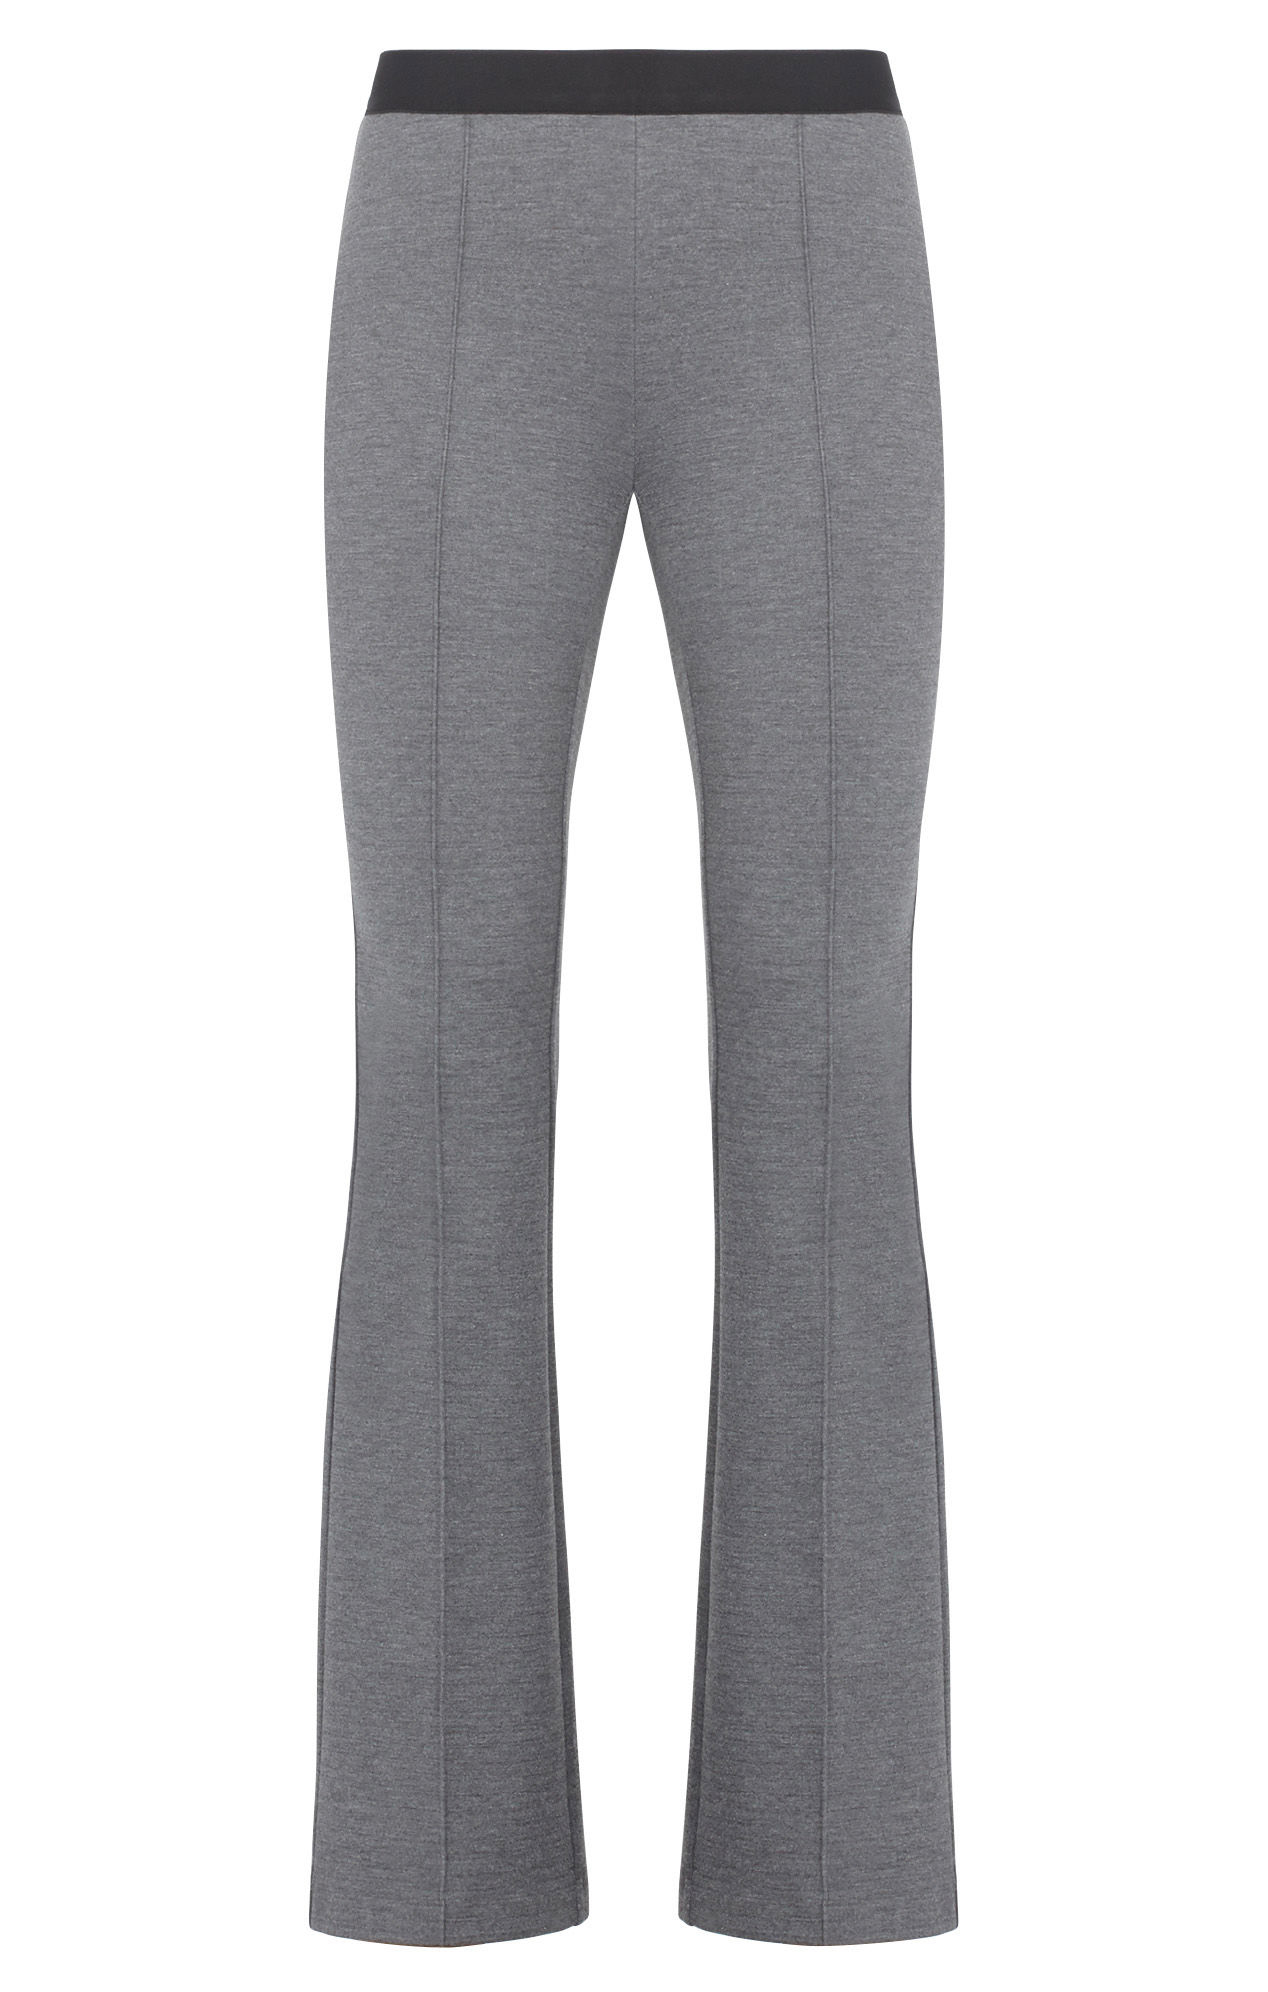 What To Wear With Grey Flare Leggings Women's